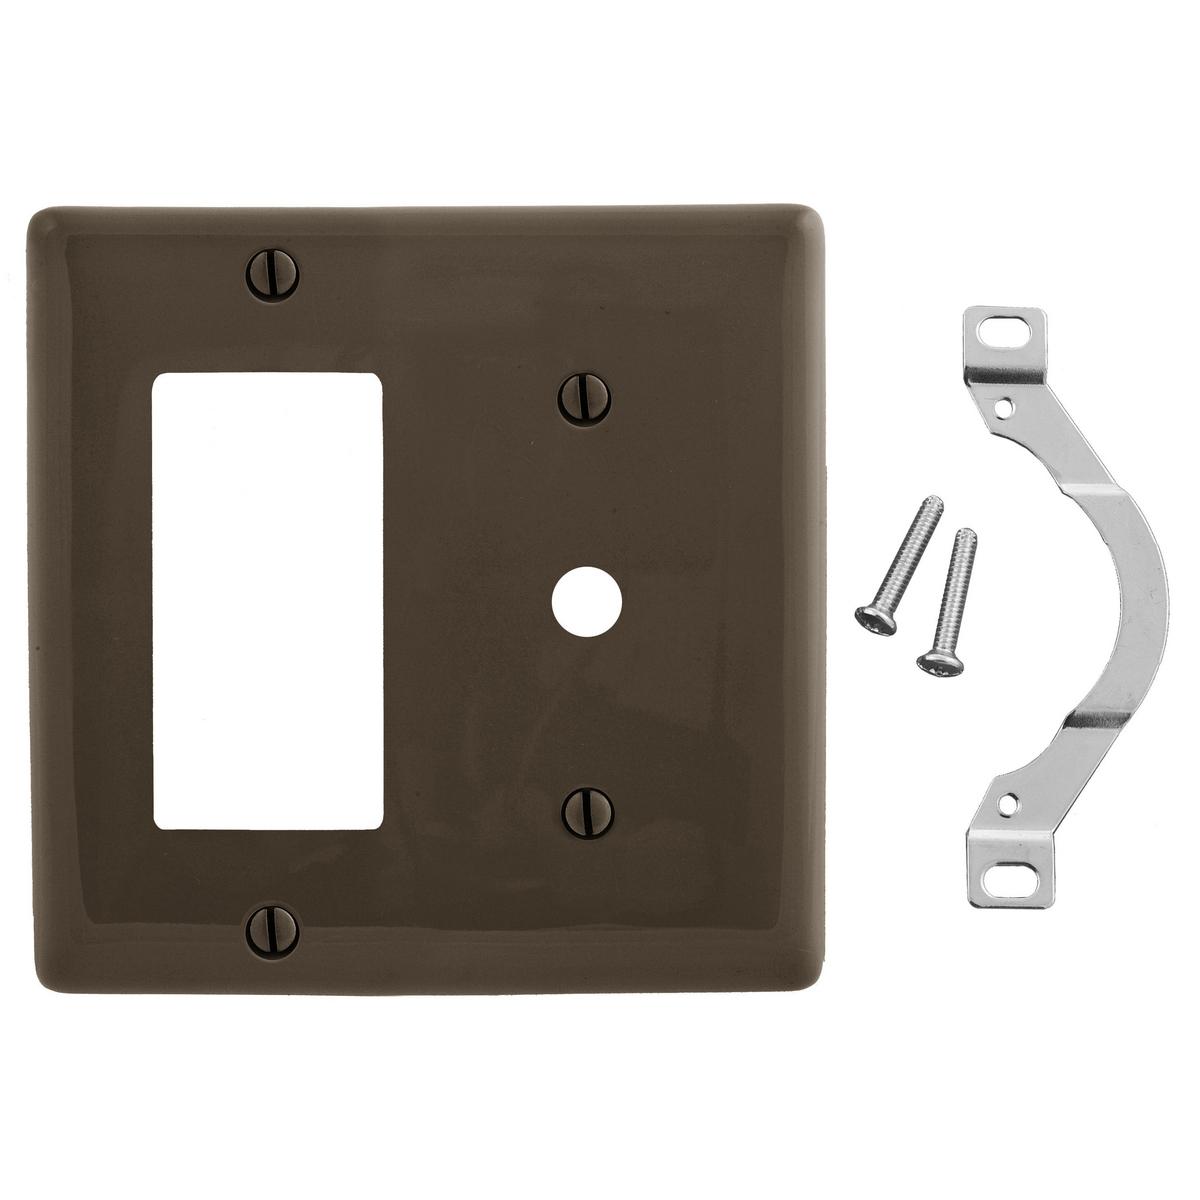 Hubbell NP1226 Wallplates, Nylon, 2-Gang, 1) Decorator, 1) .406" Opening, Brown  ; Reinforcement ribs for extra strength ; High-impact, self-extinguishing nylon material ; Captive screw feature holds mounting screw in place ; Standard Size is 1/8" larger to give you ext